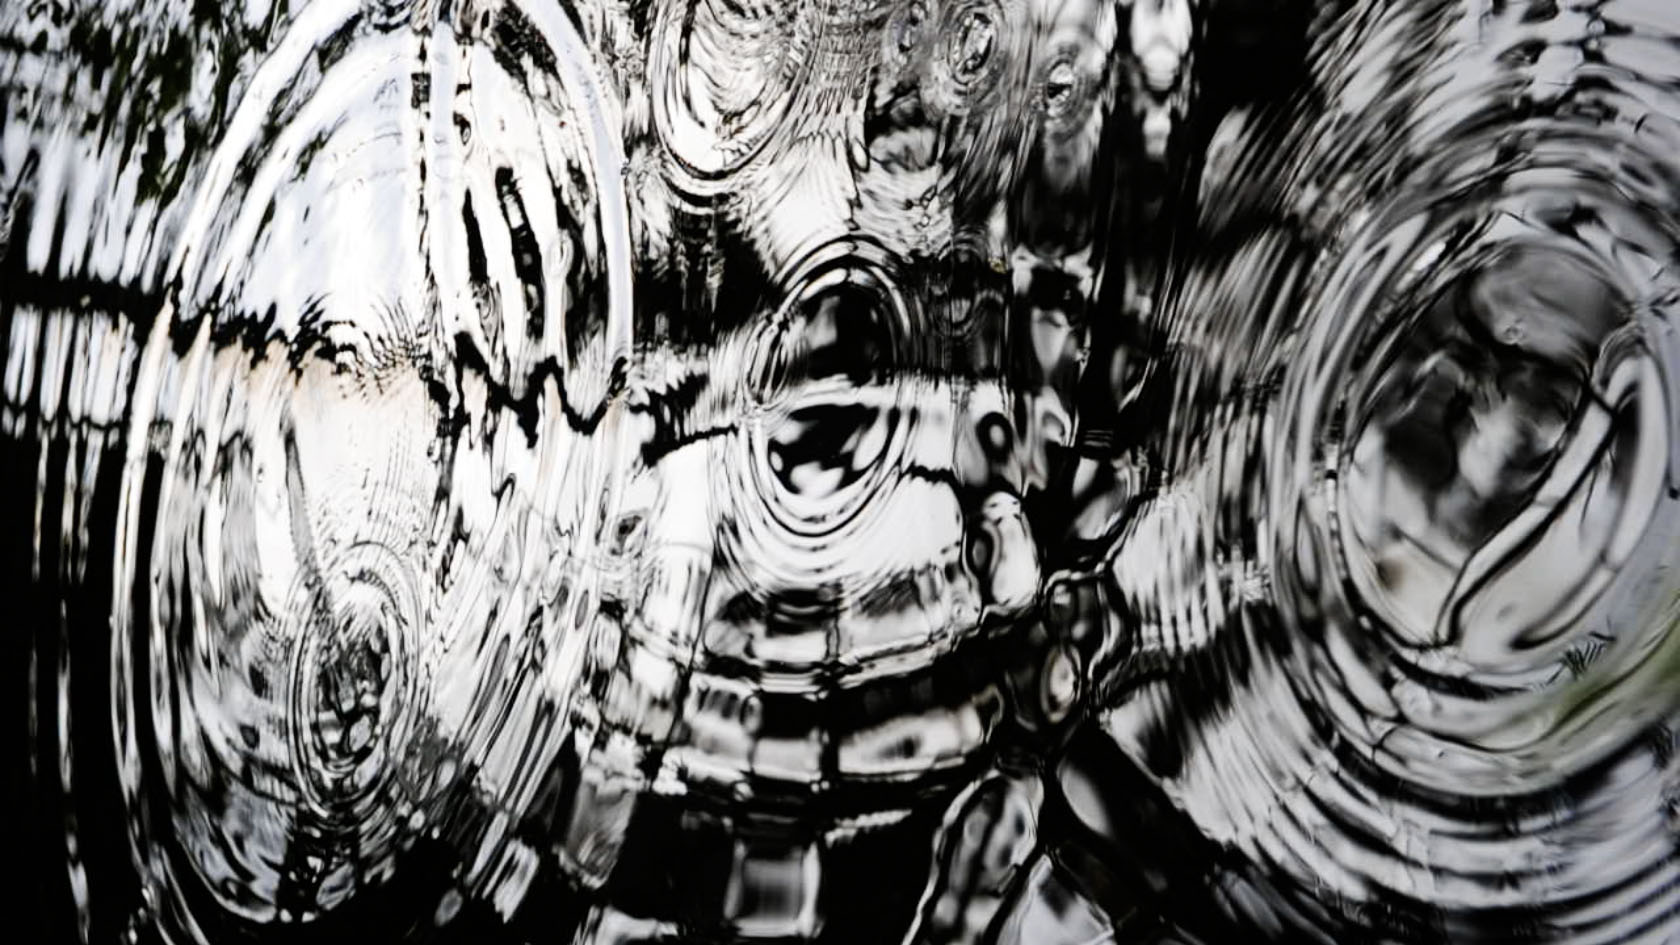 from the live visuals The Canopy by Claudia Hansen black and white water droplet pattern